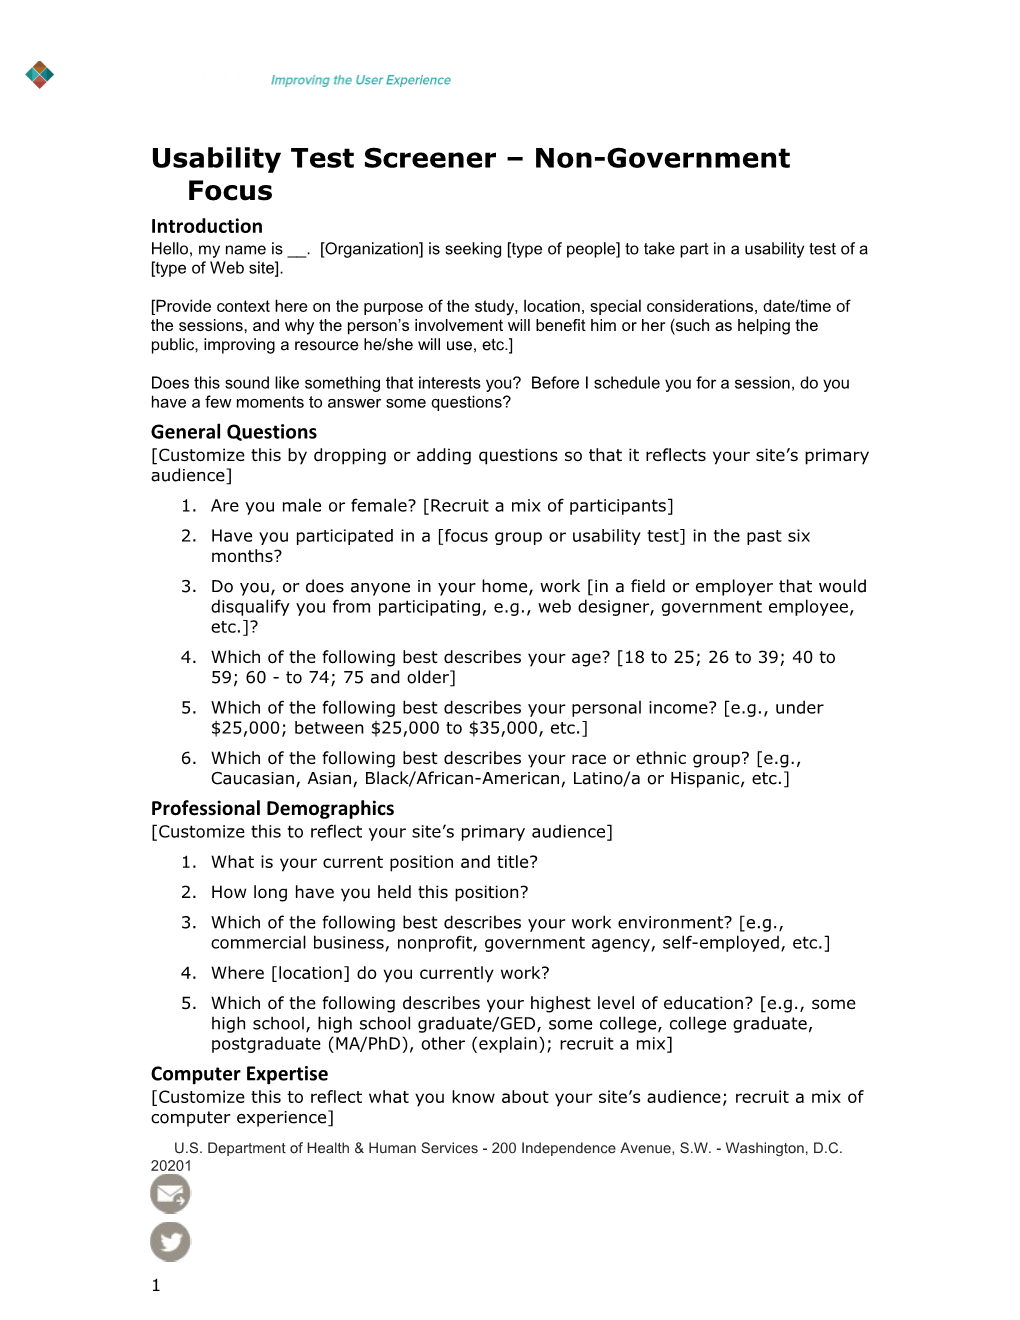 Usability Test Screener Non-Government Focus